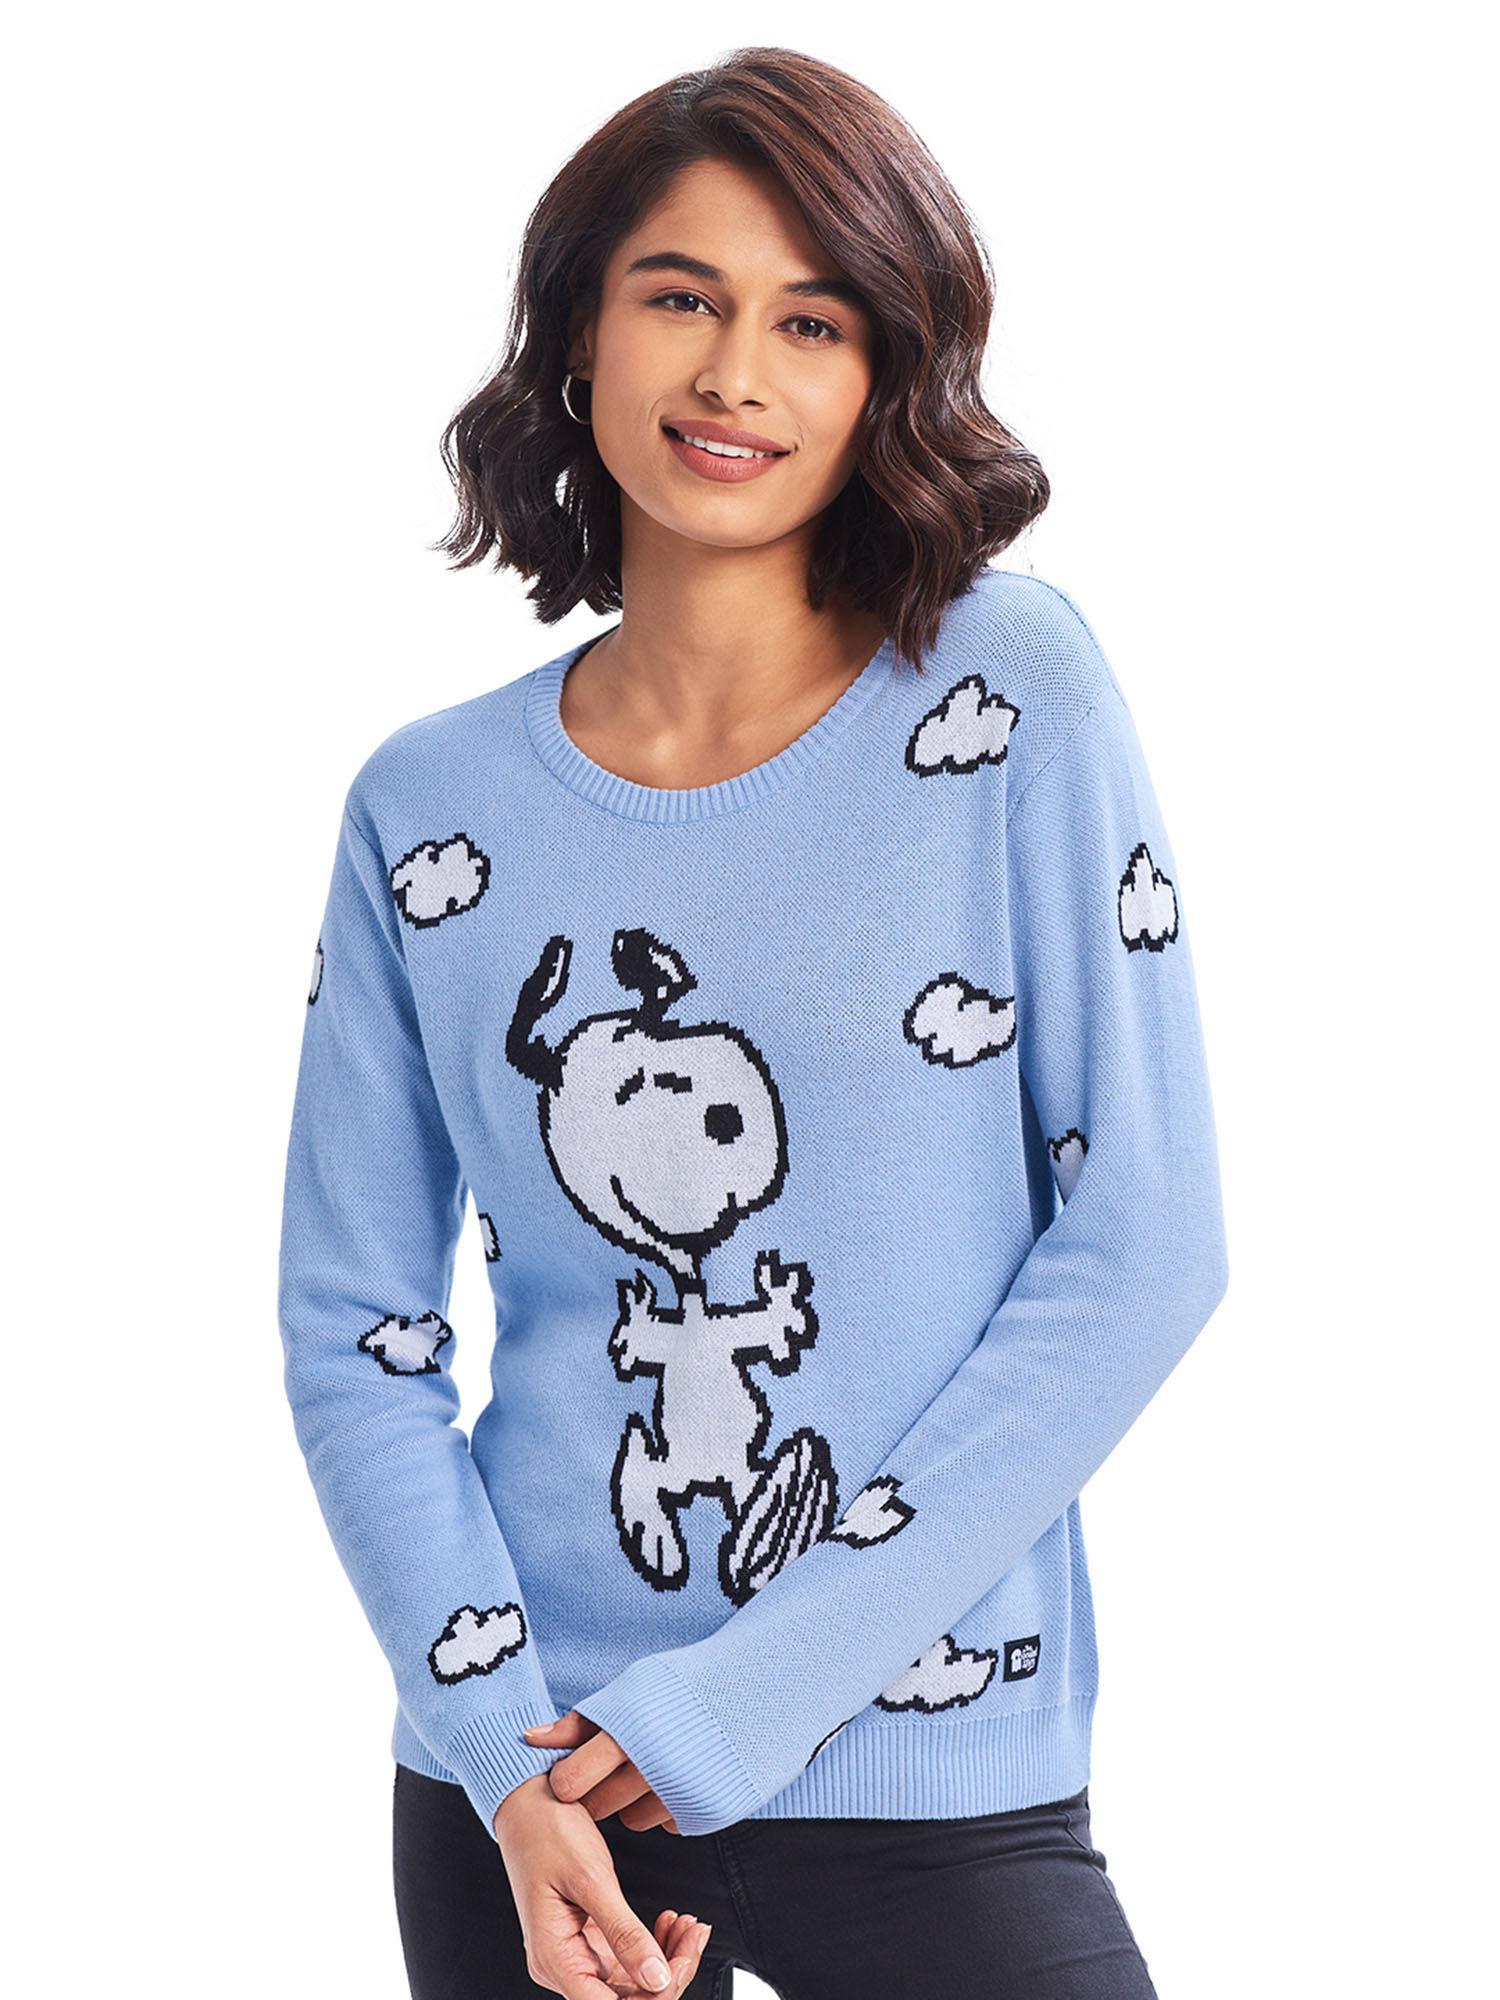 official peanuts hug knitted sweater women